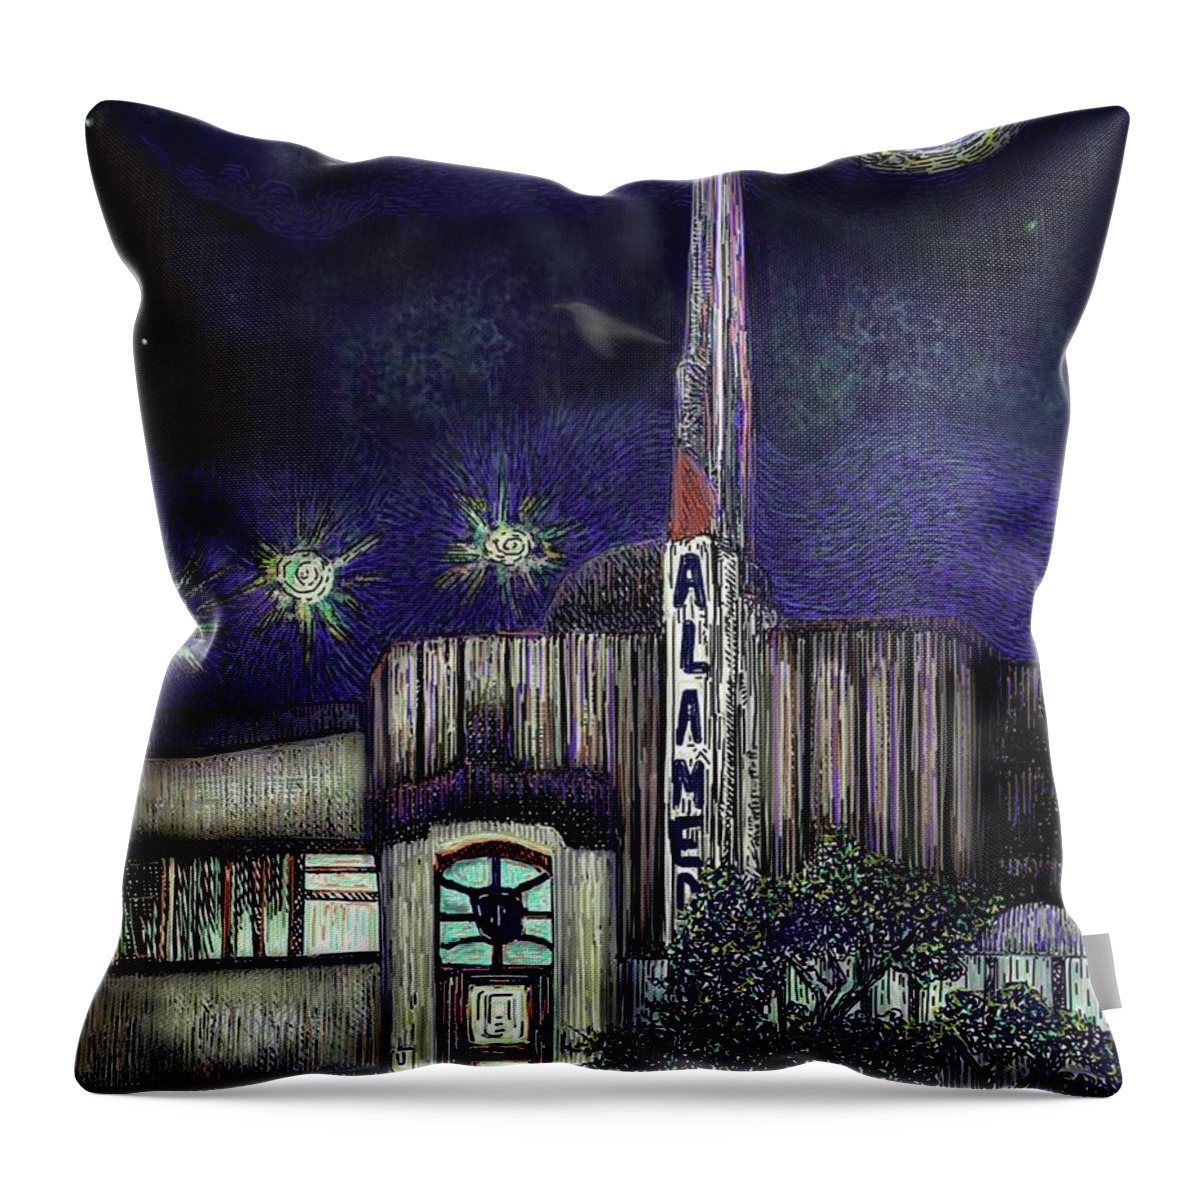 Alameda Throw Pillow featuring the digital art Alameda Theater at Night by Angela Weddle